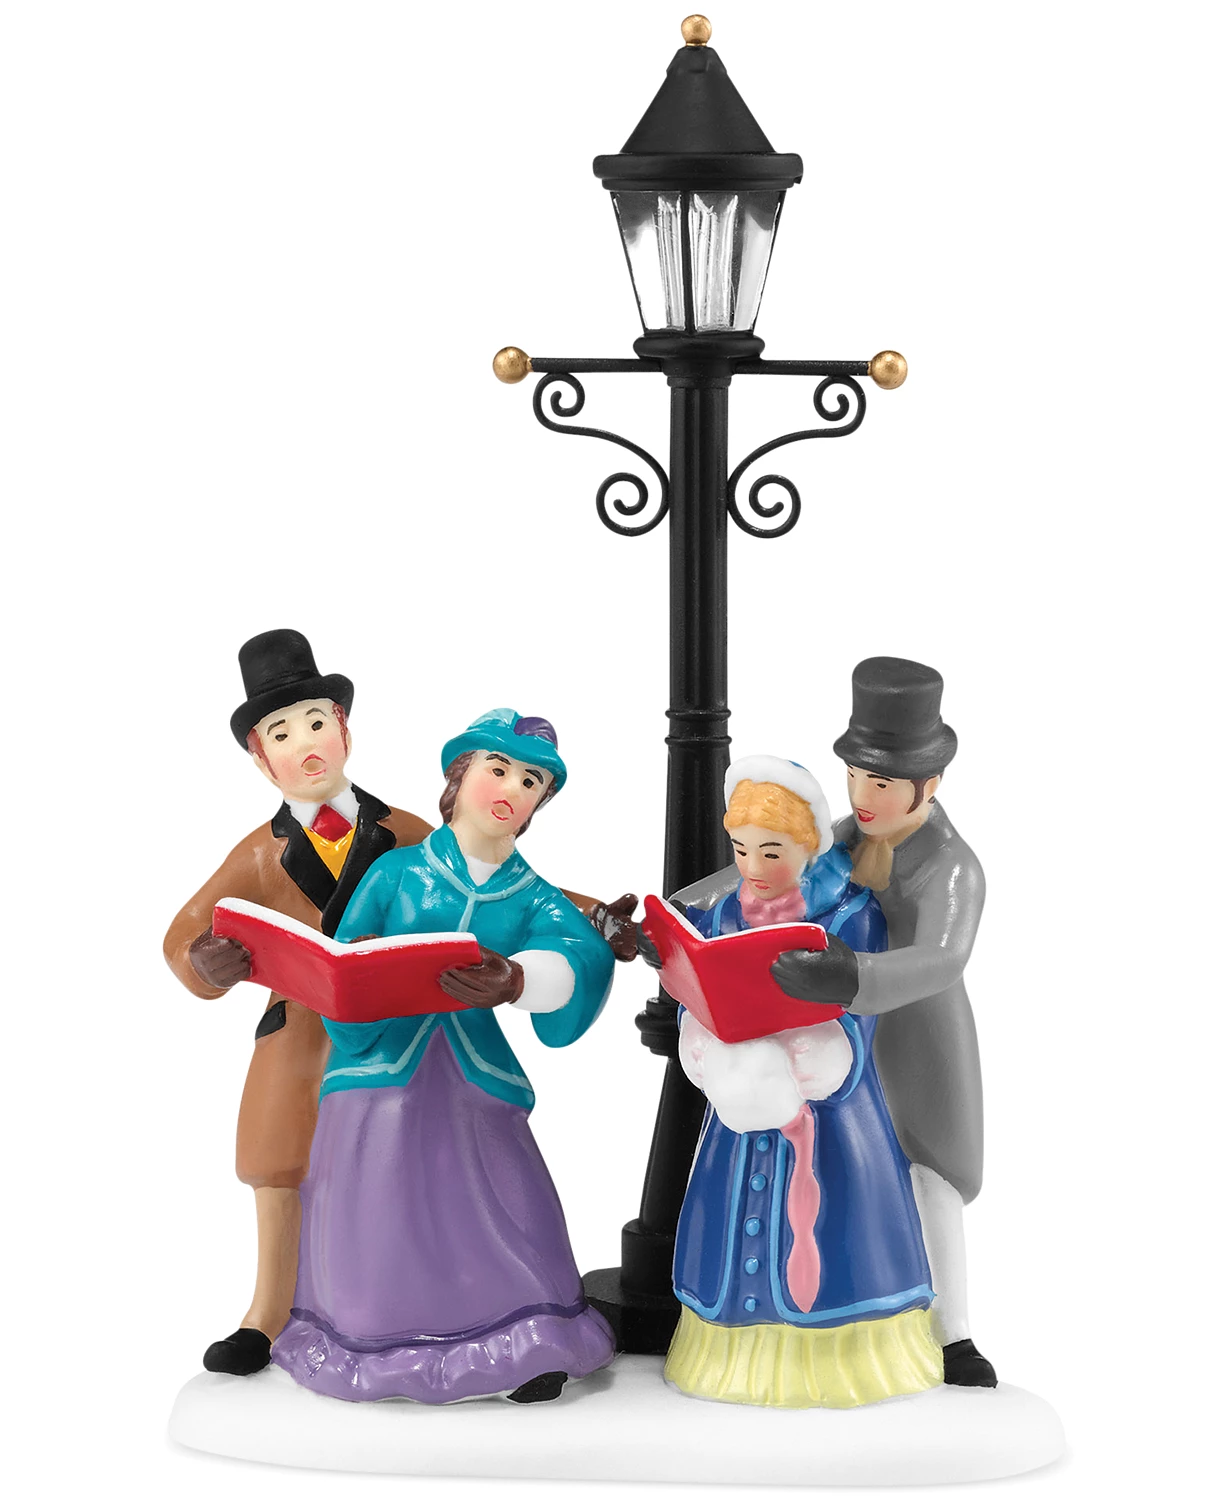 Department 56 Dickens' Village Caroling By Lamplight Collectible Figurine